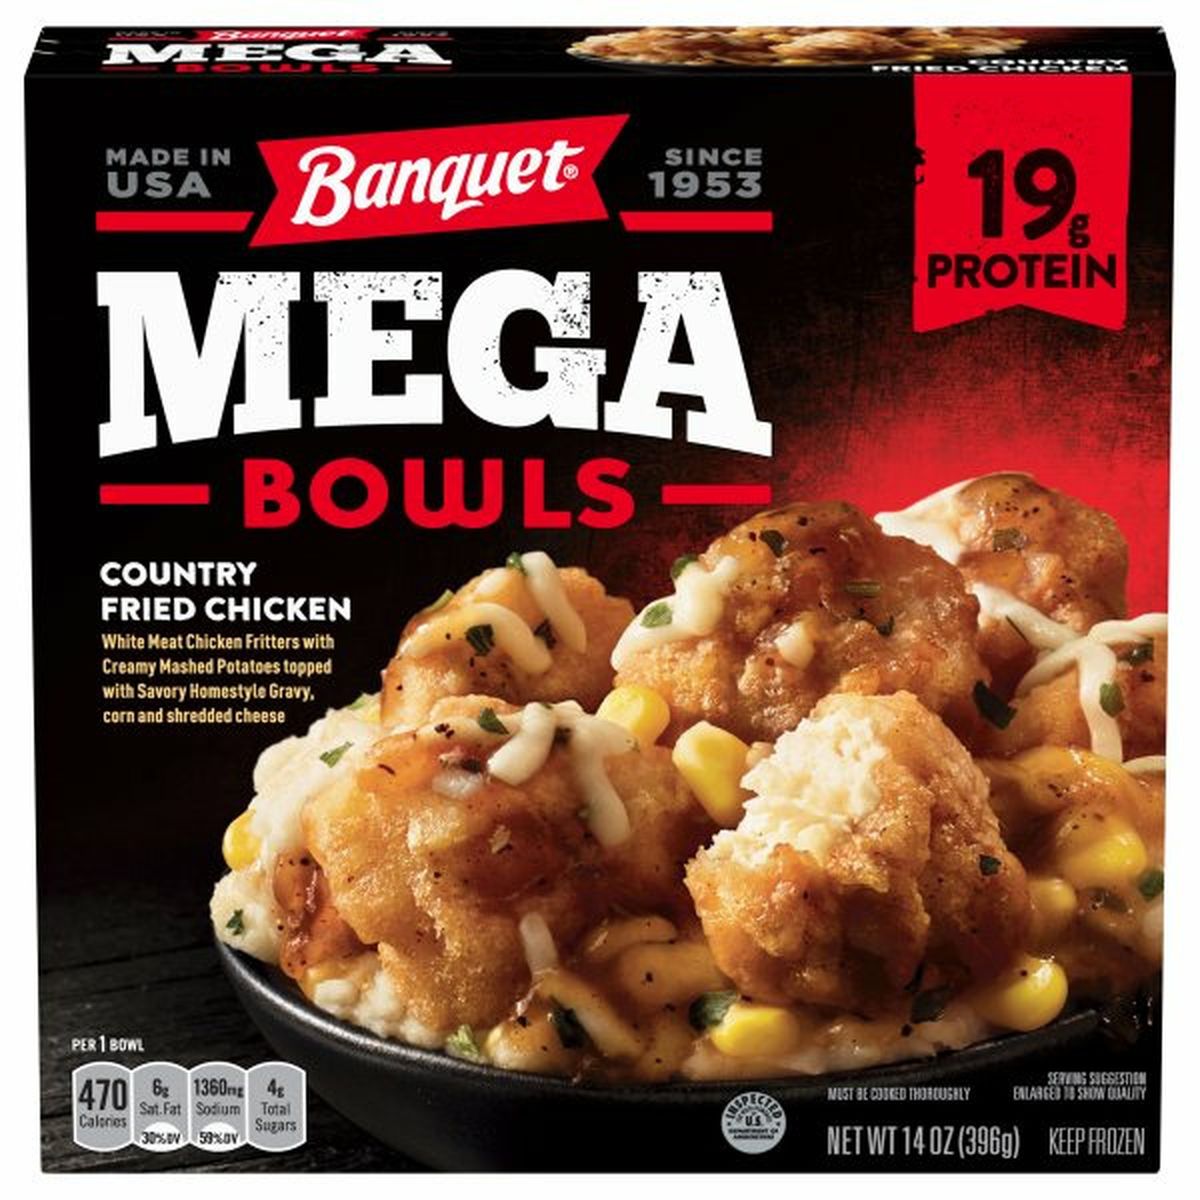 Calories in Banquet Mega Bowls Country Fried Chicken